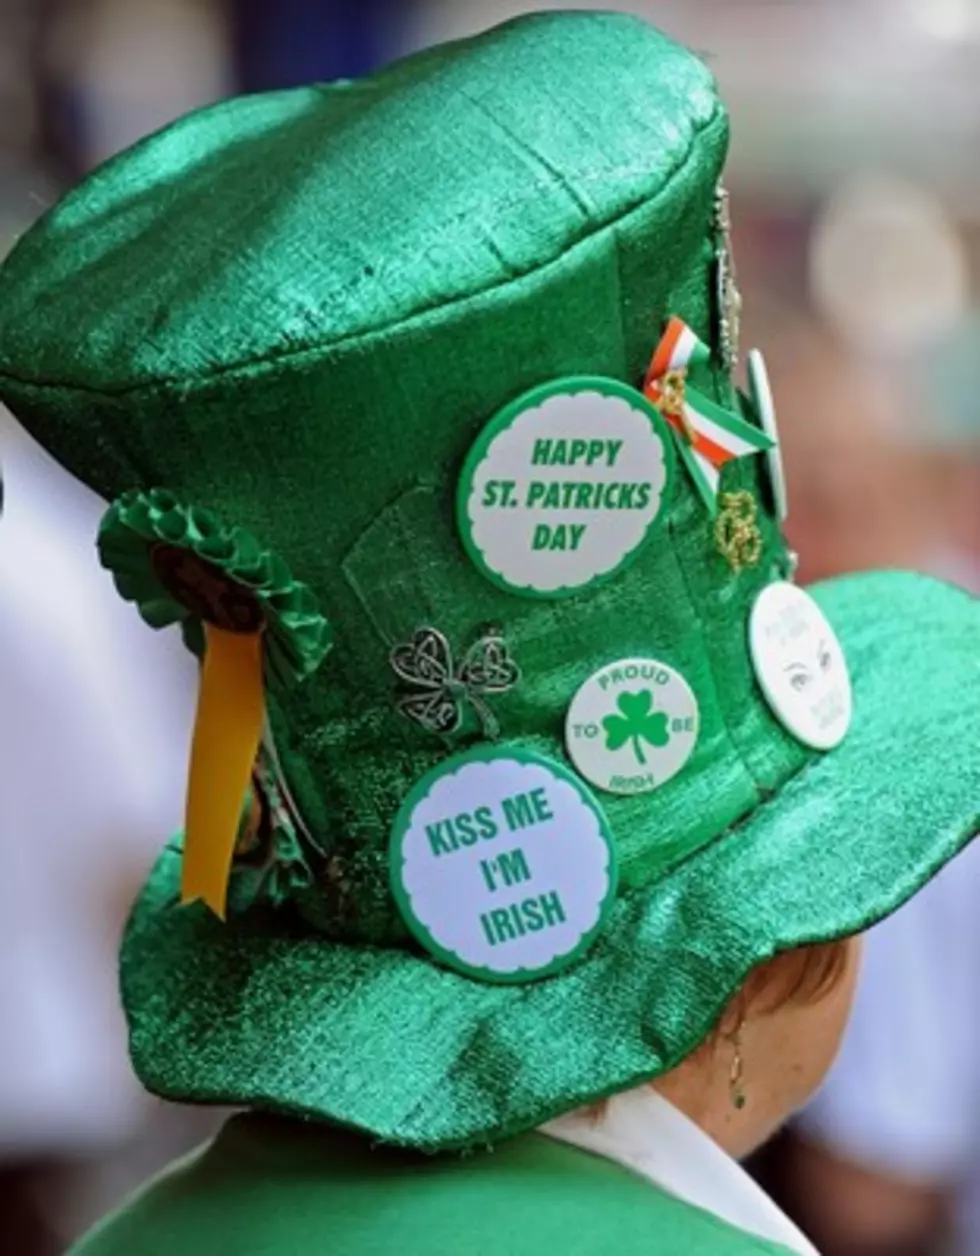 Nominations Sought For 2014 St. Patrick’s Day Parade Grand Marshal